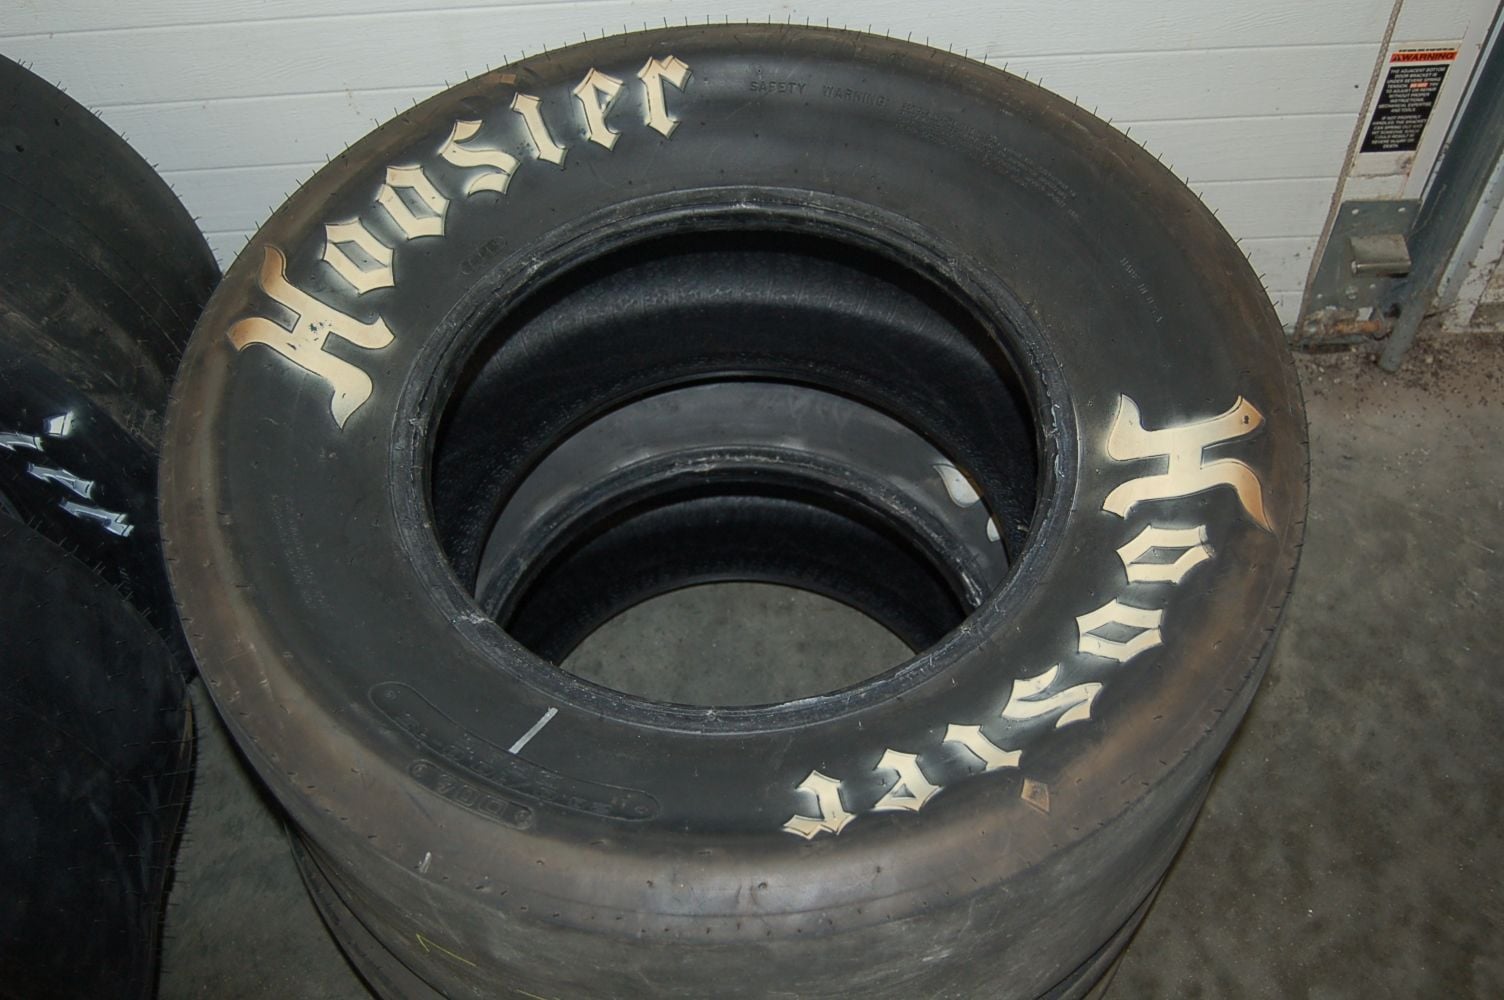  - Used Hoosier 28 X 10 X 15 - D06 COMPOUND - $225 plus shipping - Carlinville, IL 62626, United States